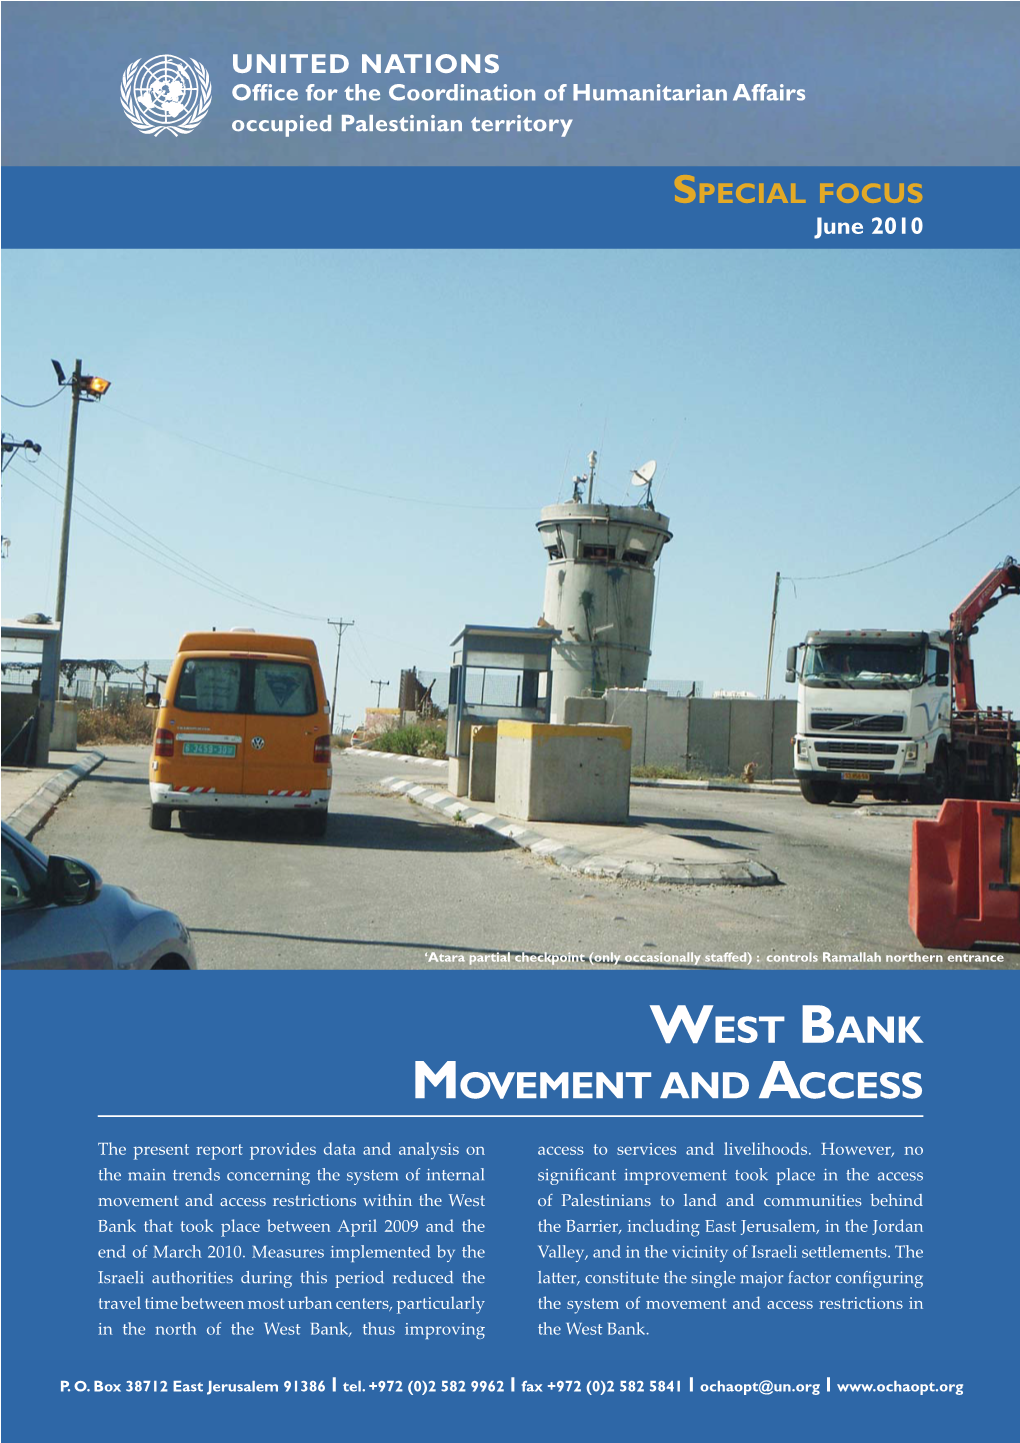 West Bank Movement and Access